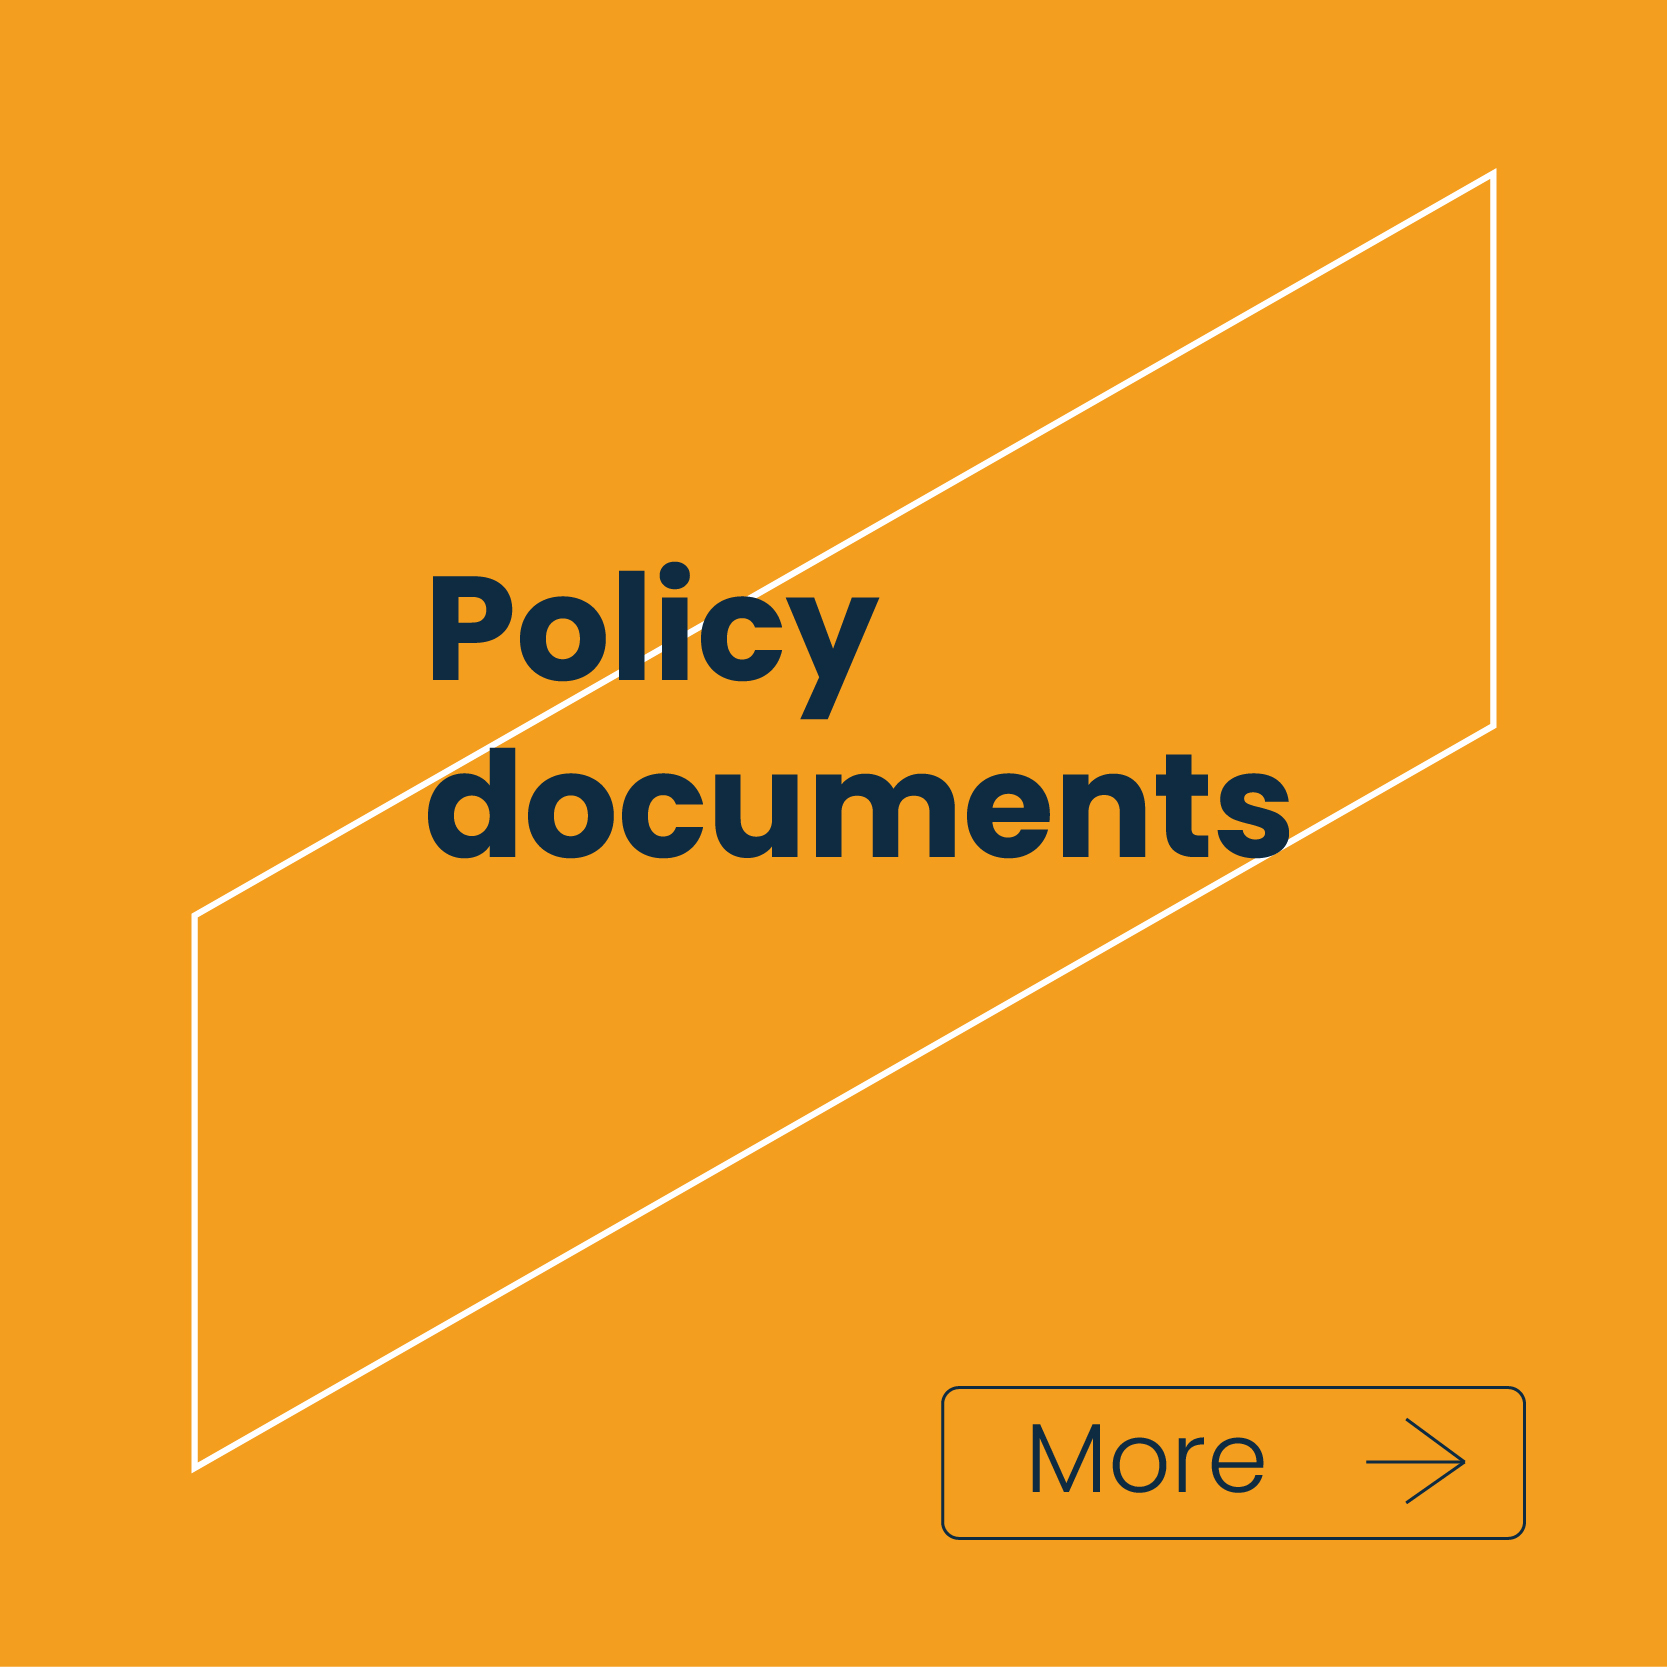 Link to Policy documents